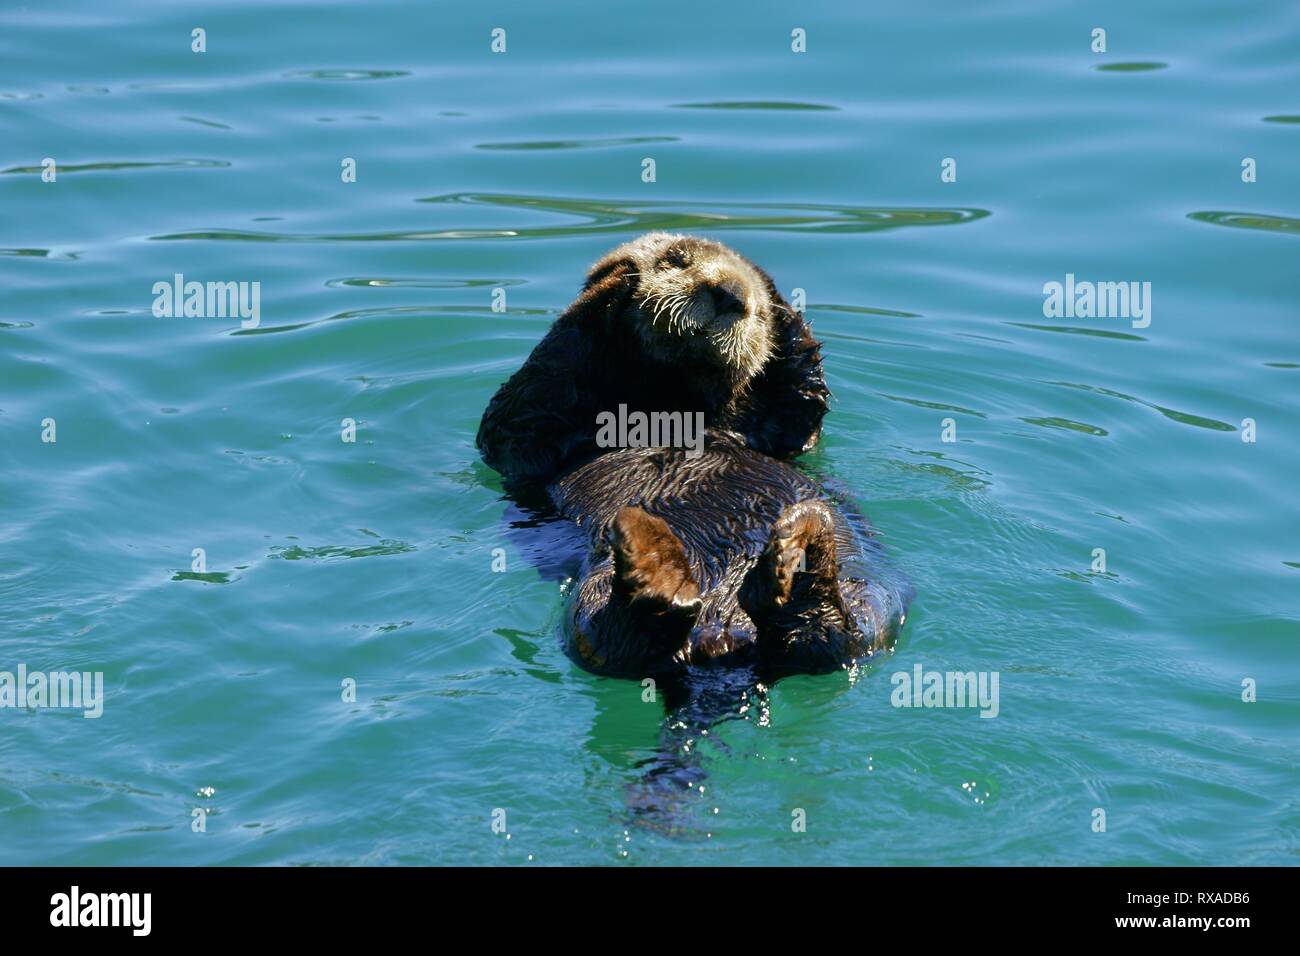 Single northern river otter floating together belly up in a bright blue water Stock Photo